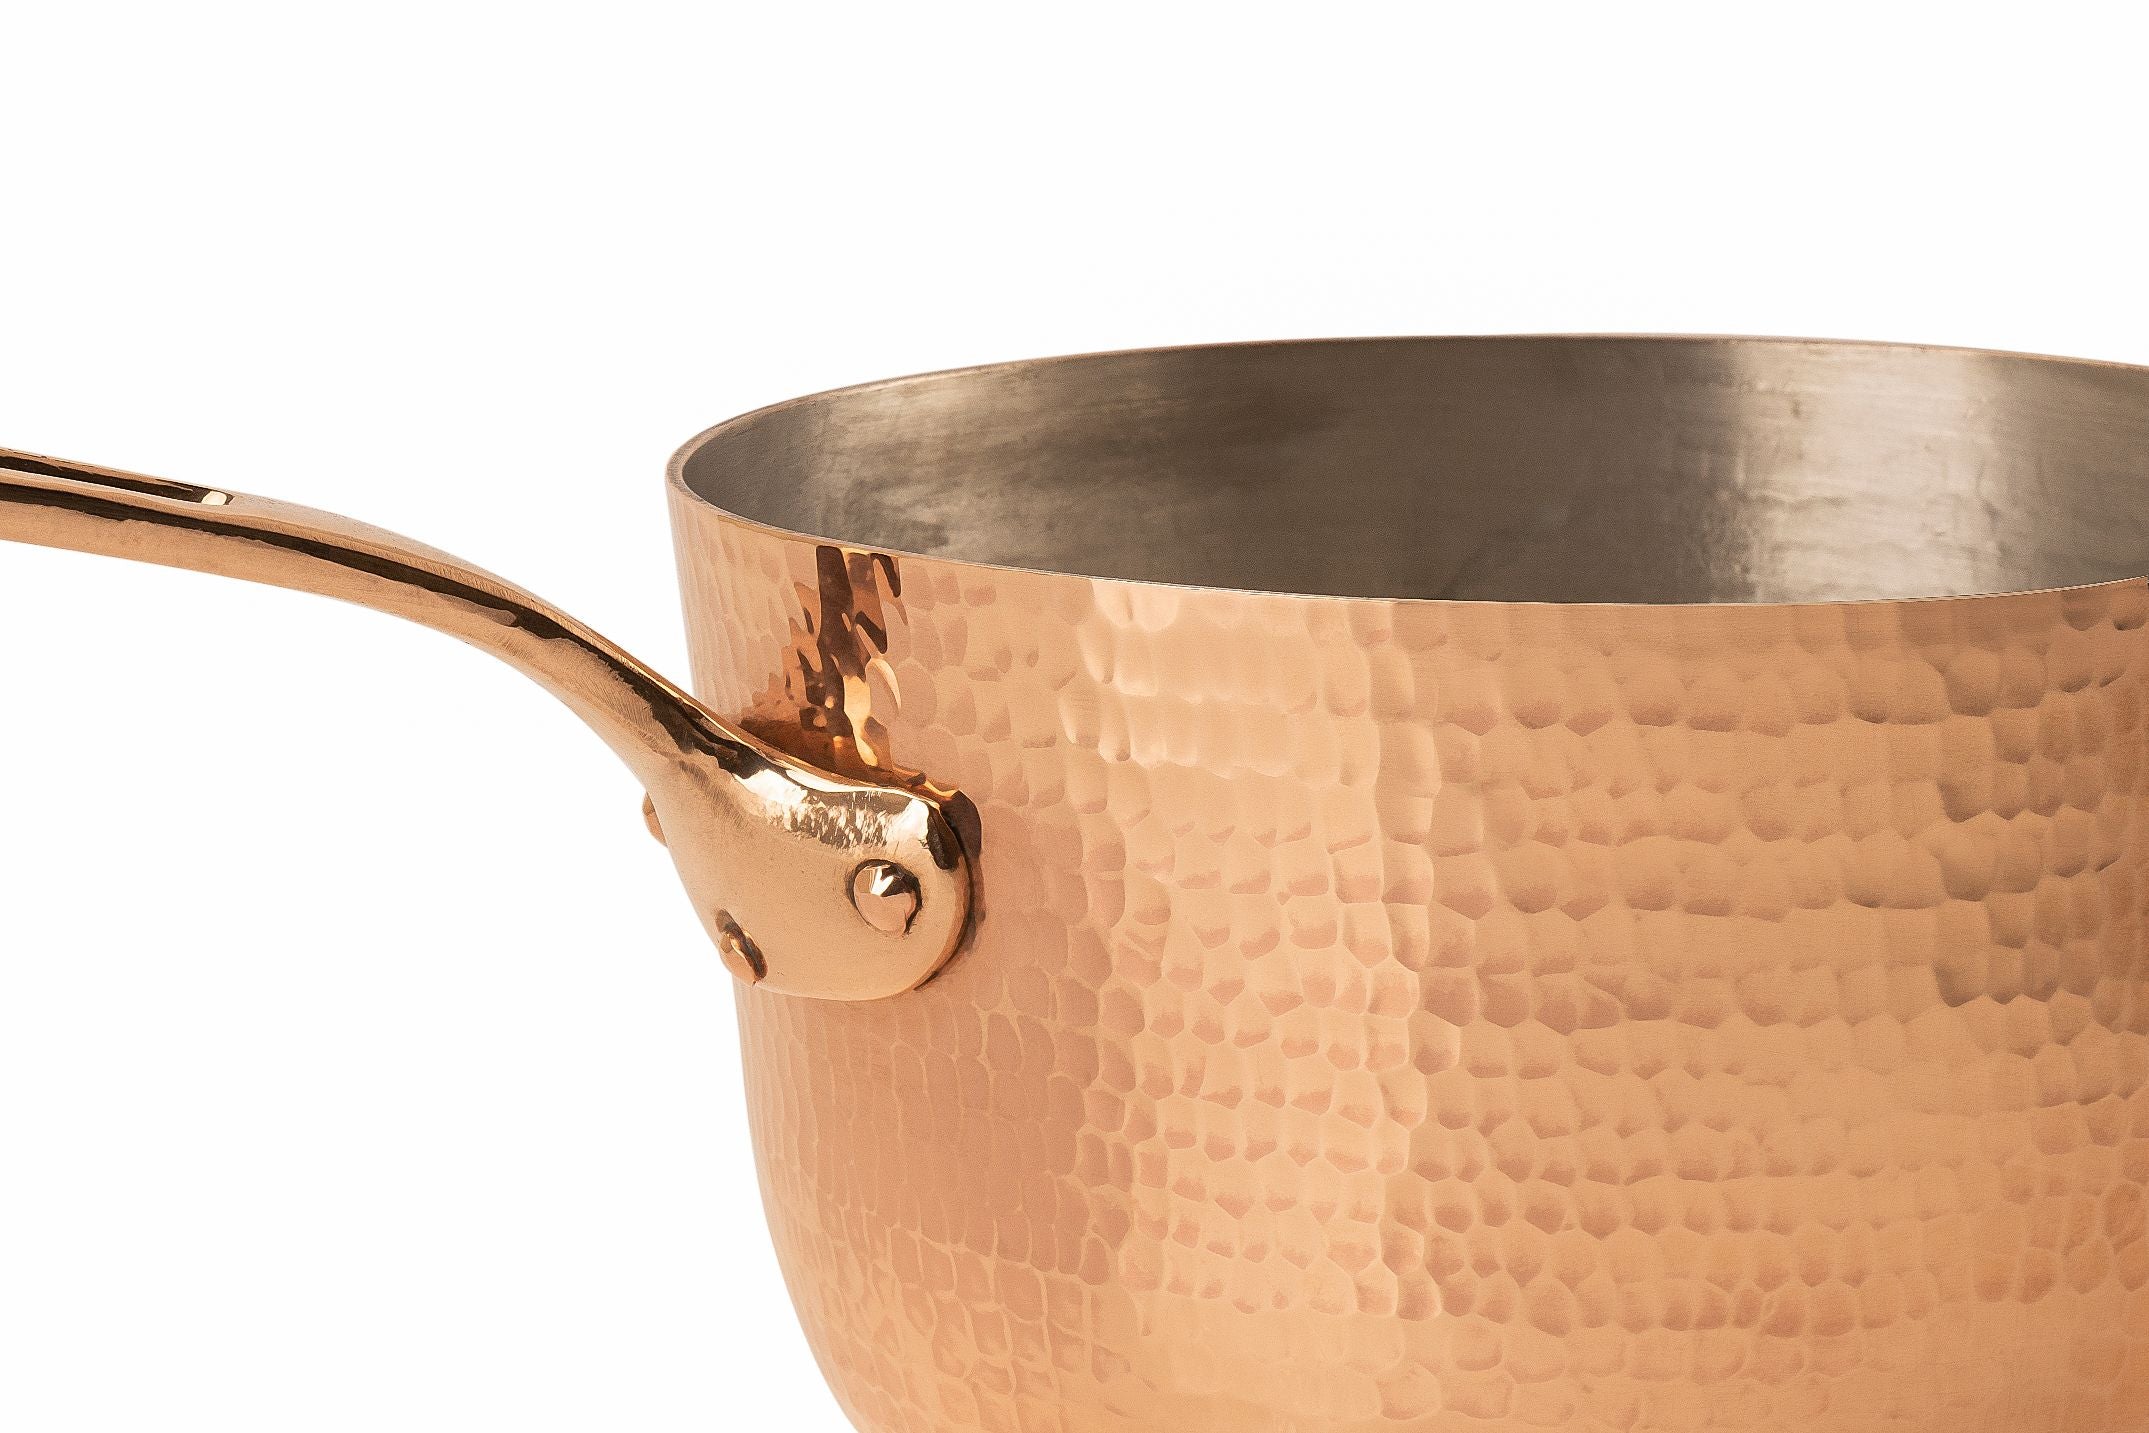 Italian hammered cookware tin lined copper as priceless art gifts